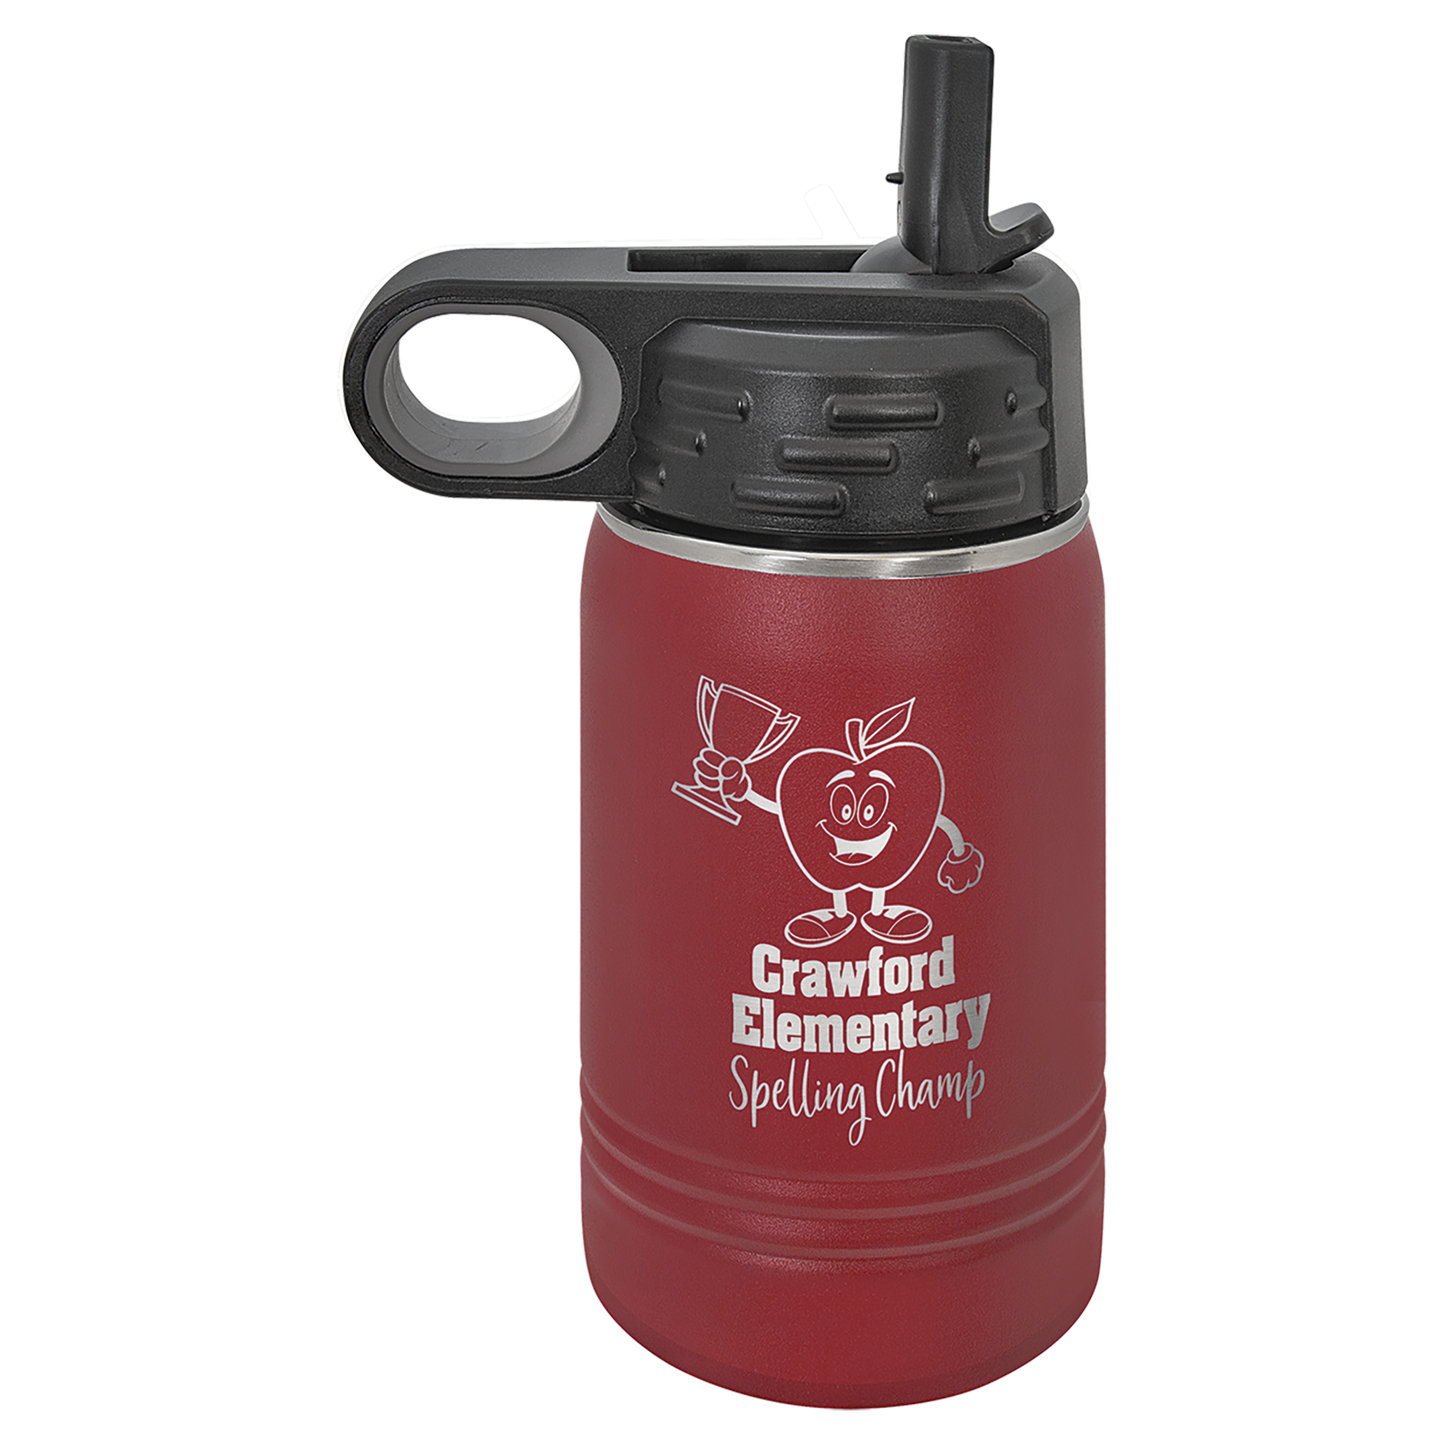 Polar Camel 12 oz. Vacuum Insulated Water Bottle with Lid and Flip up Straw